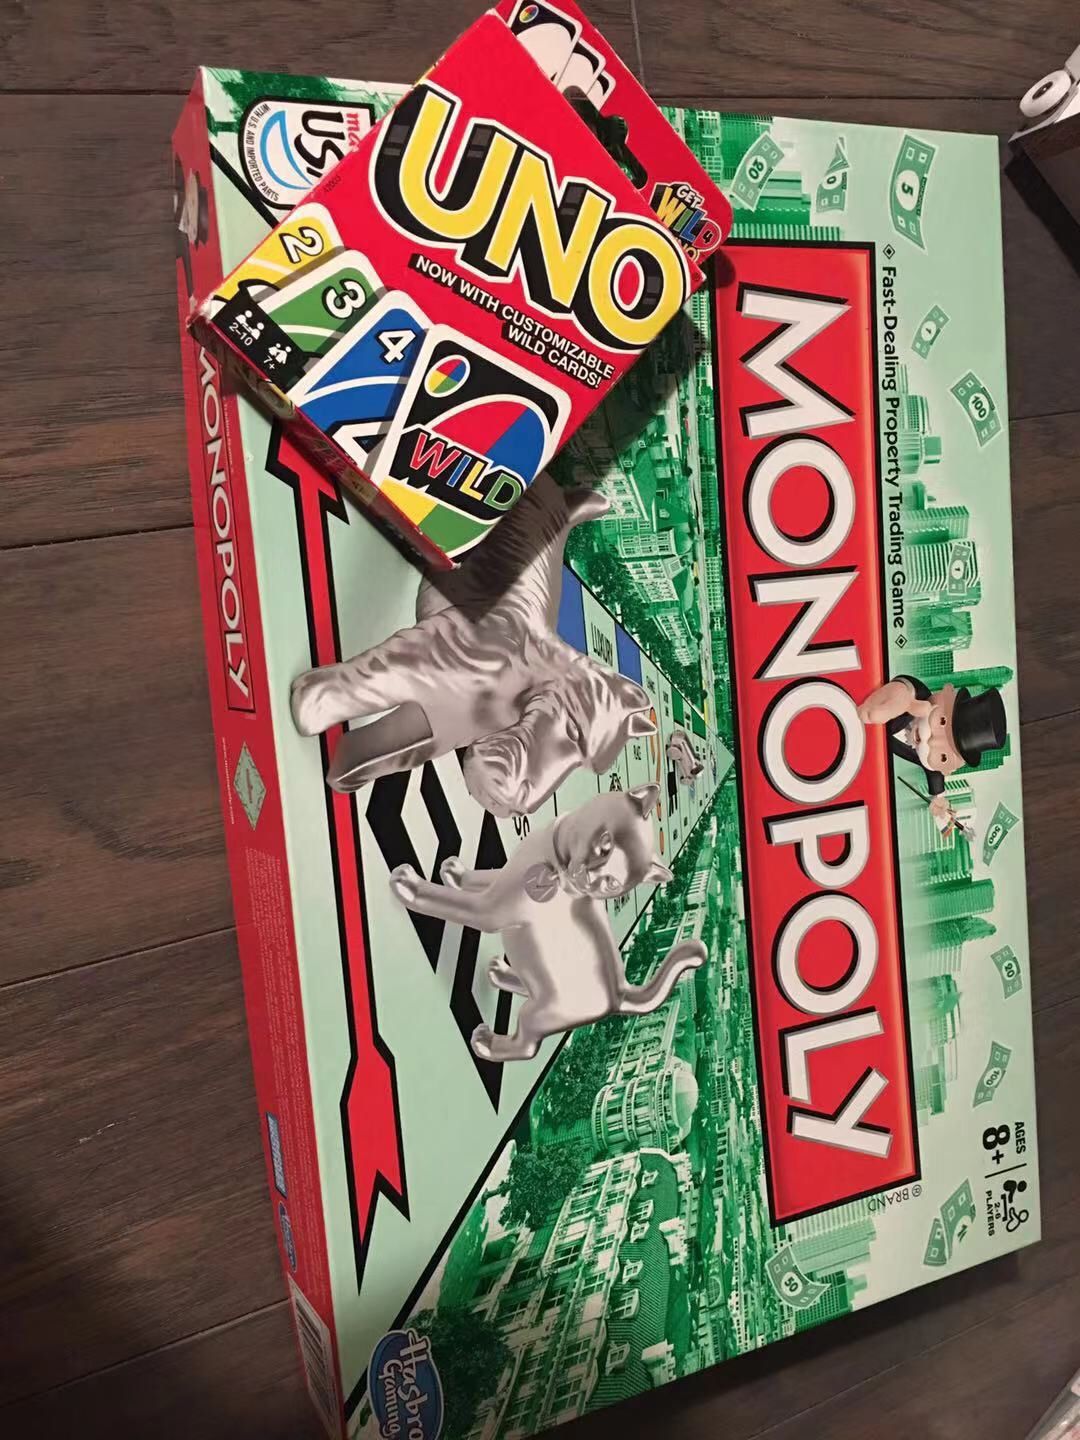 Monopoly and UNO